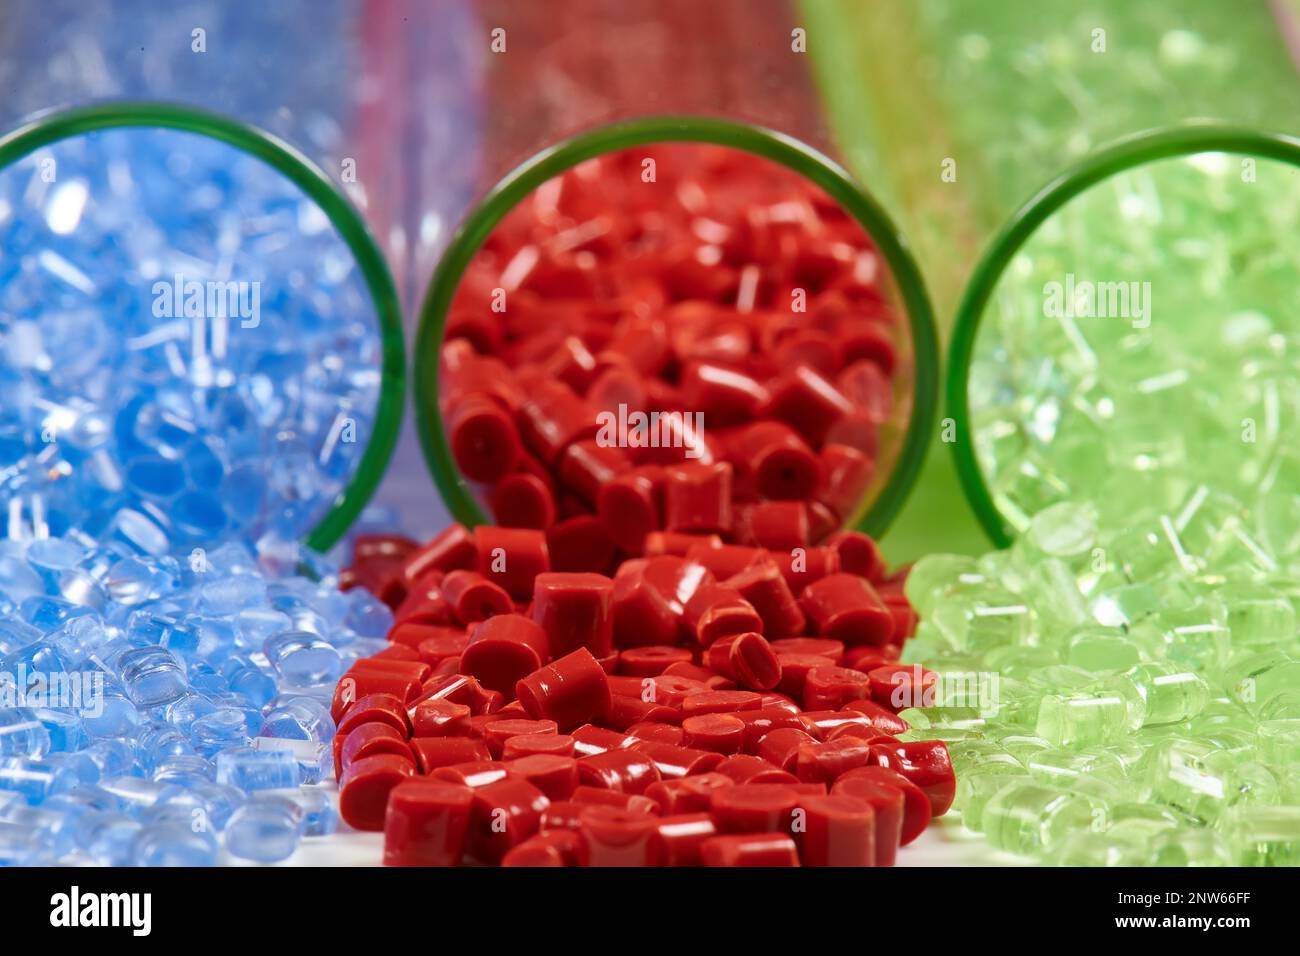 several colored plastic resins in test tubes in laboratory Stock Photo